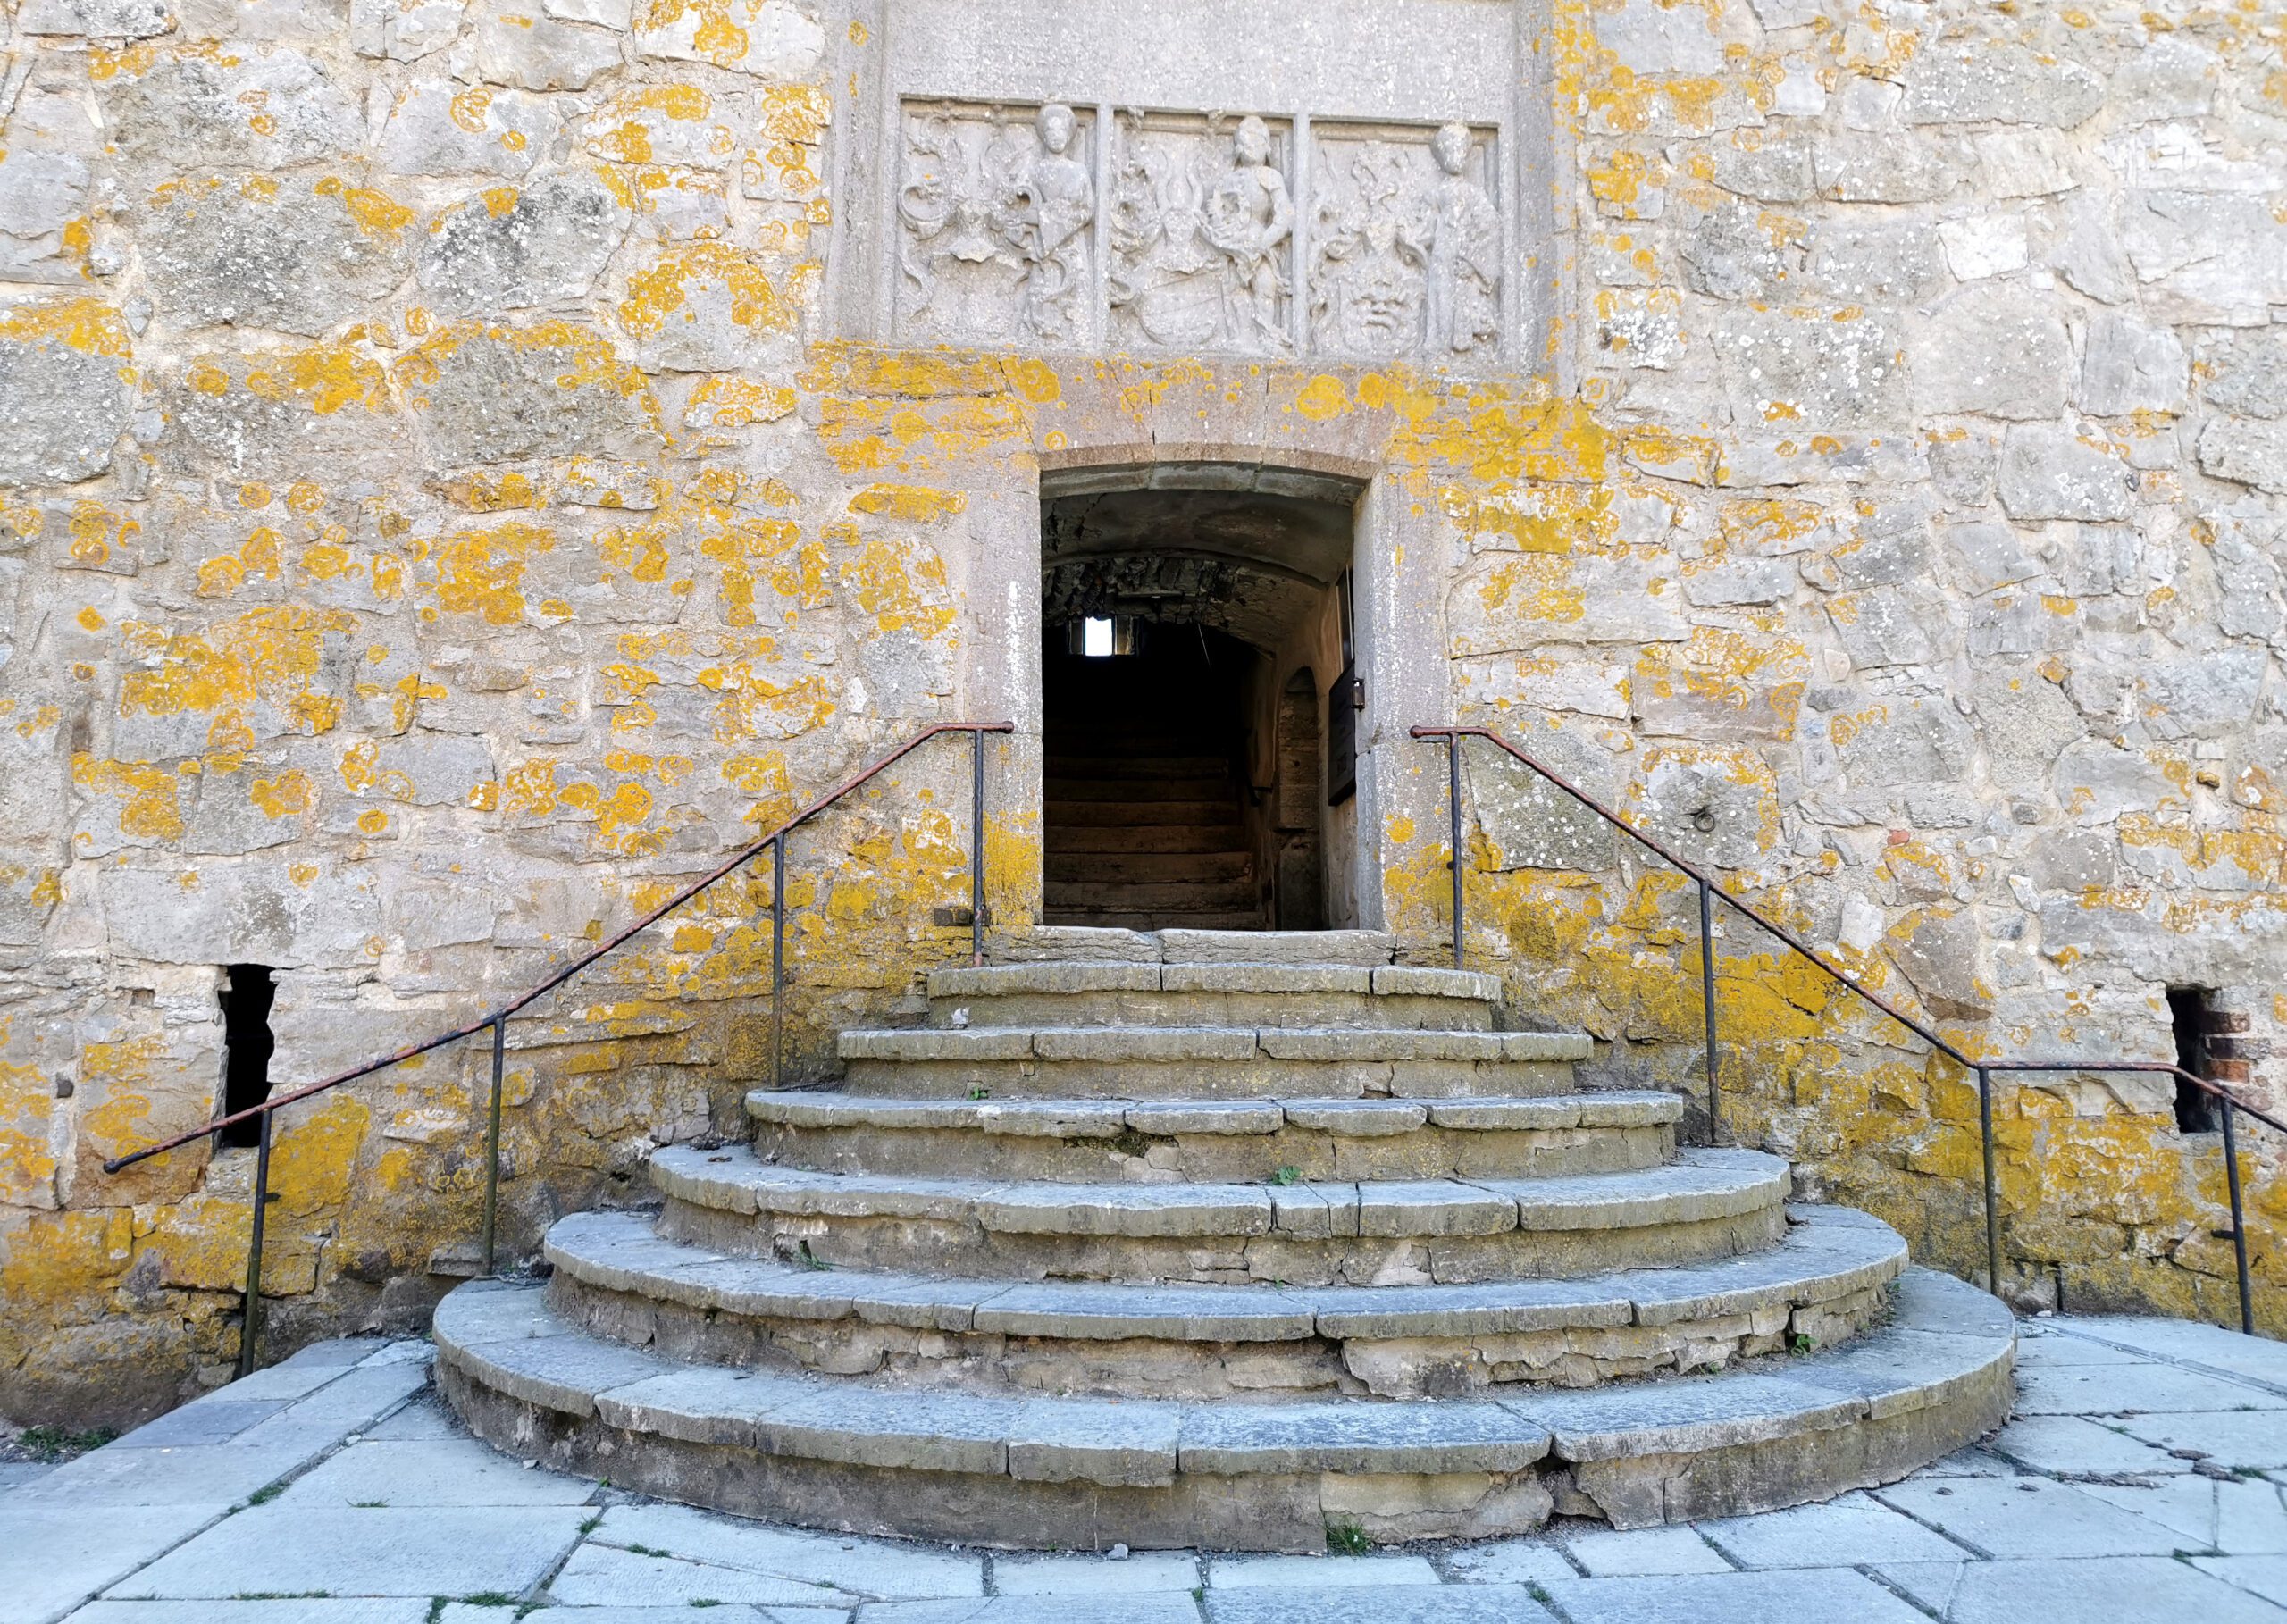 The picture shows the castle gate with the stairs at the bottom of the picture, as well as the gate in the middle with a stone tablet above.